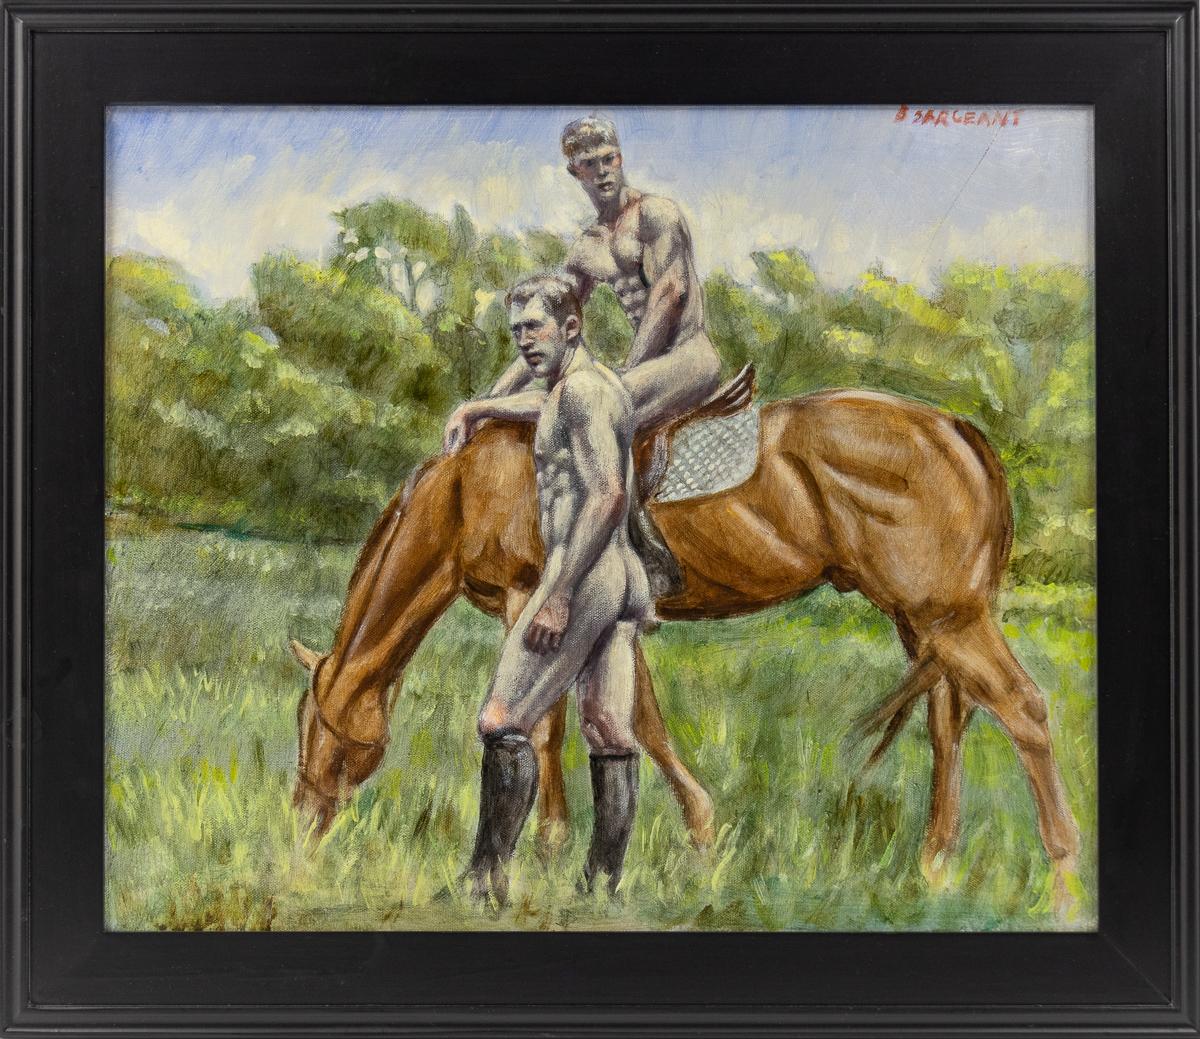 Mark Beard Nude Painting - [Bruce Sargeant (1898-1938)] Two Men with Horse